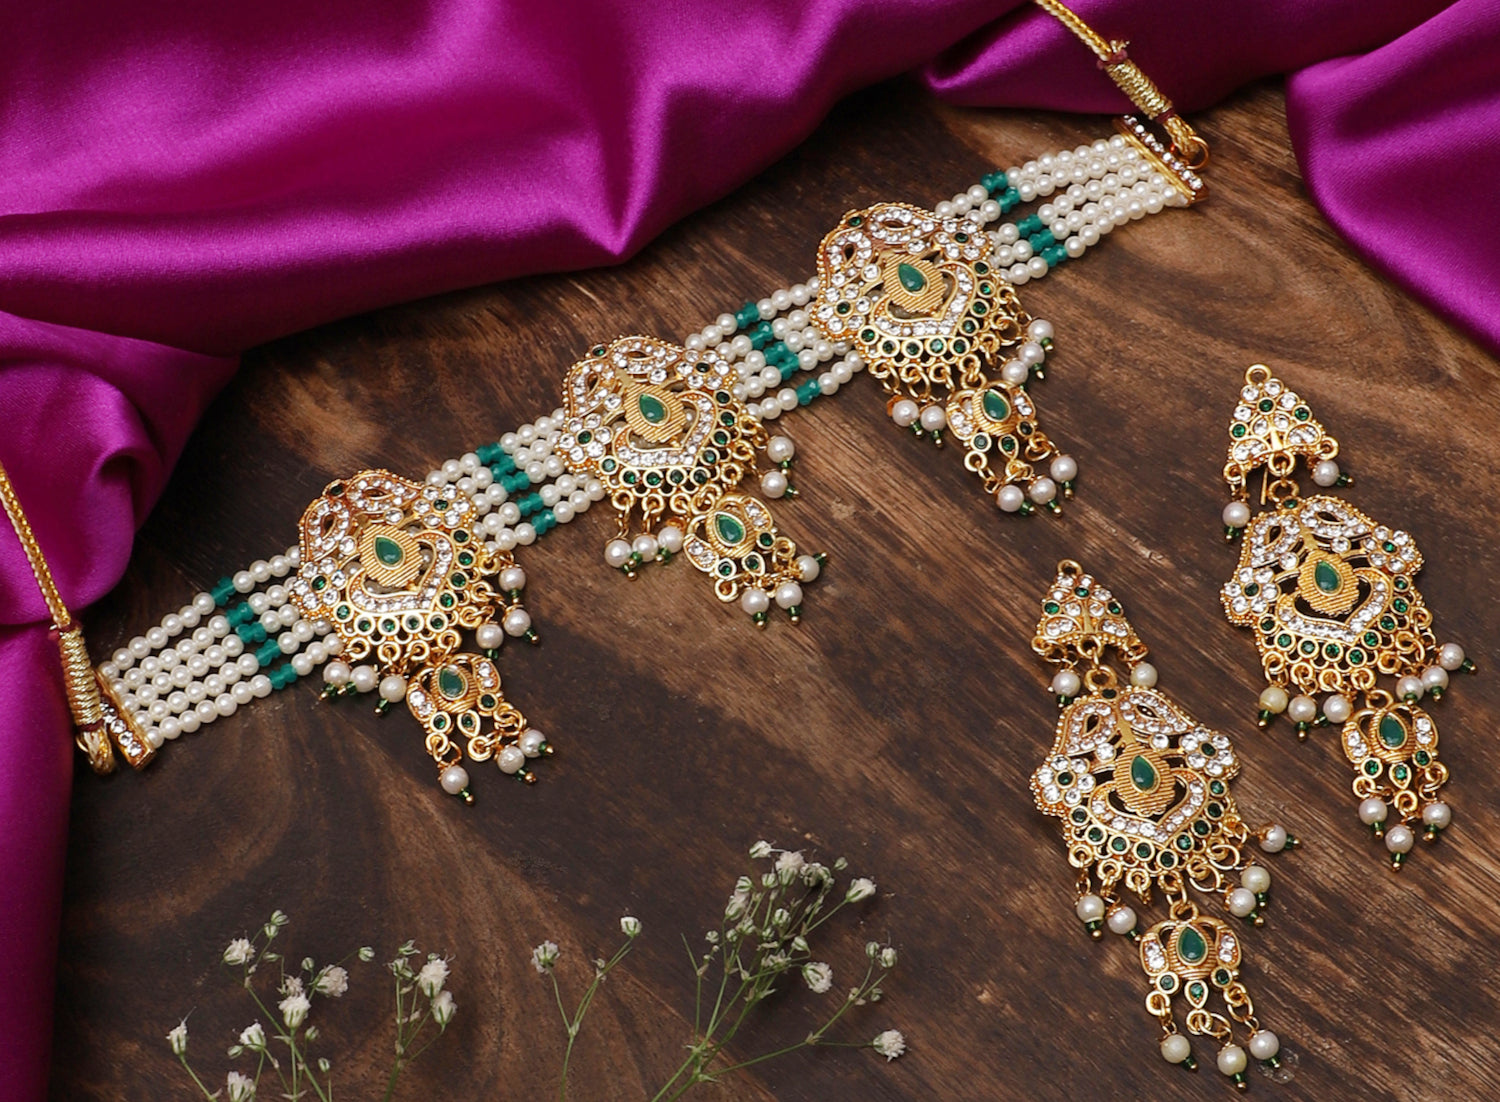 Traditional Gold Plated Choker with Earrings | Buy This Online Choker Necklace from Mekkna